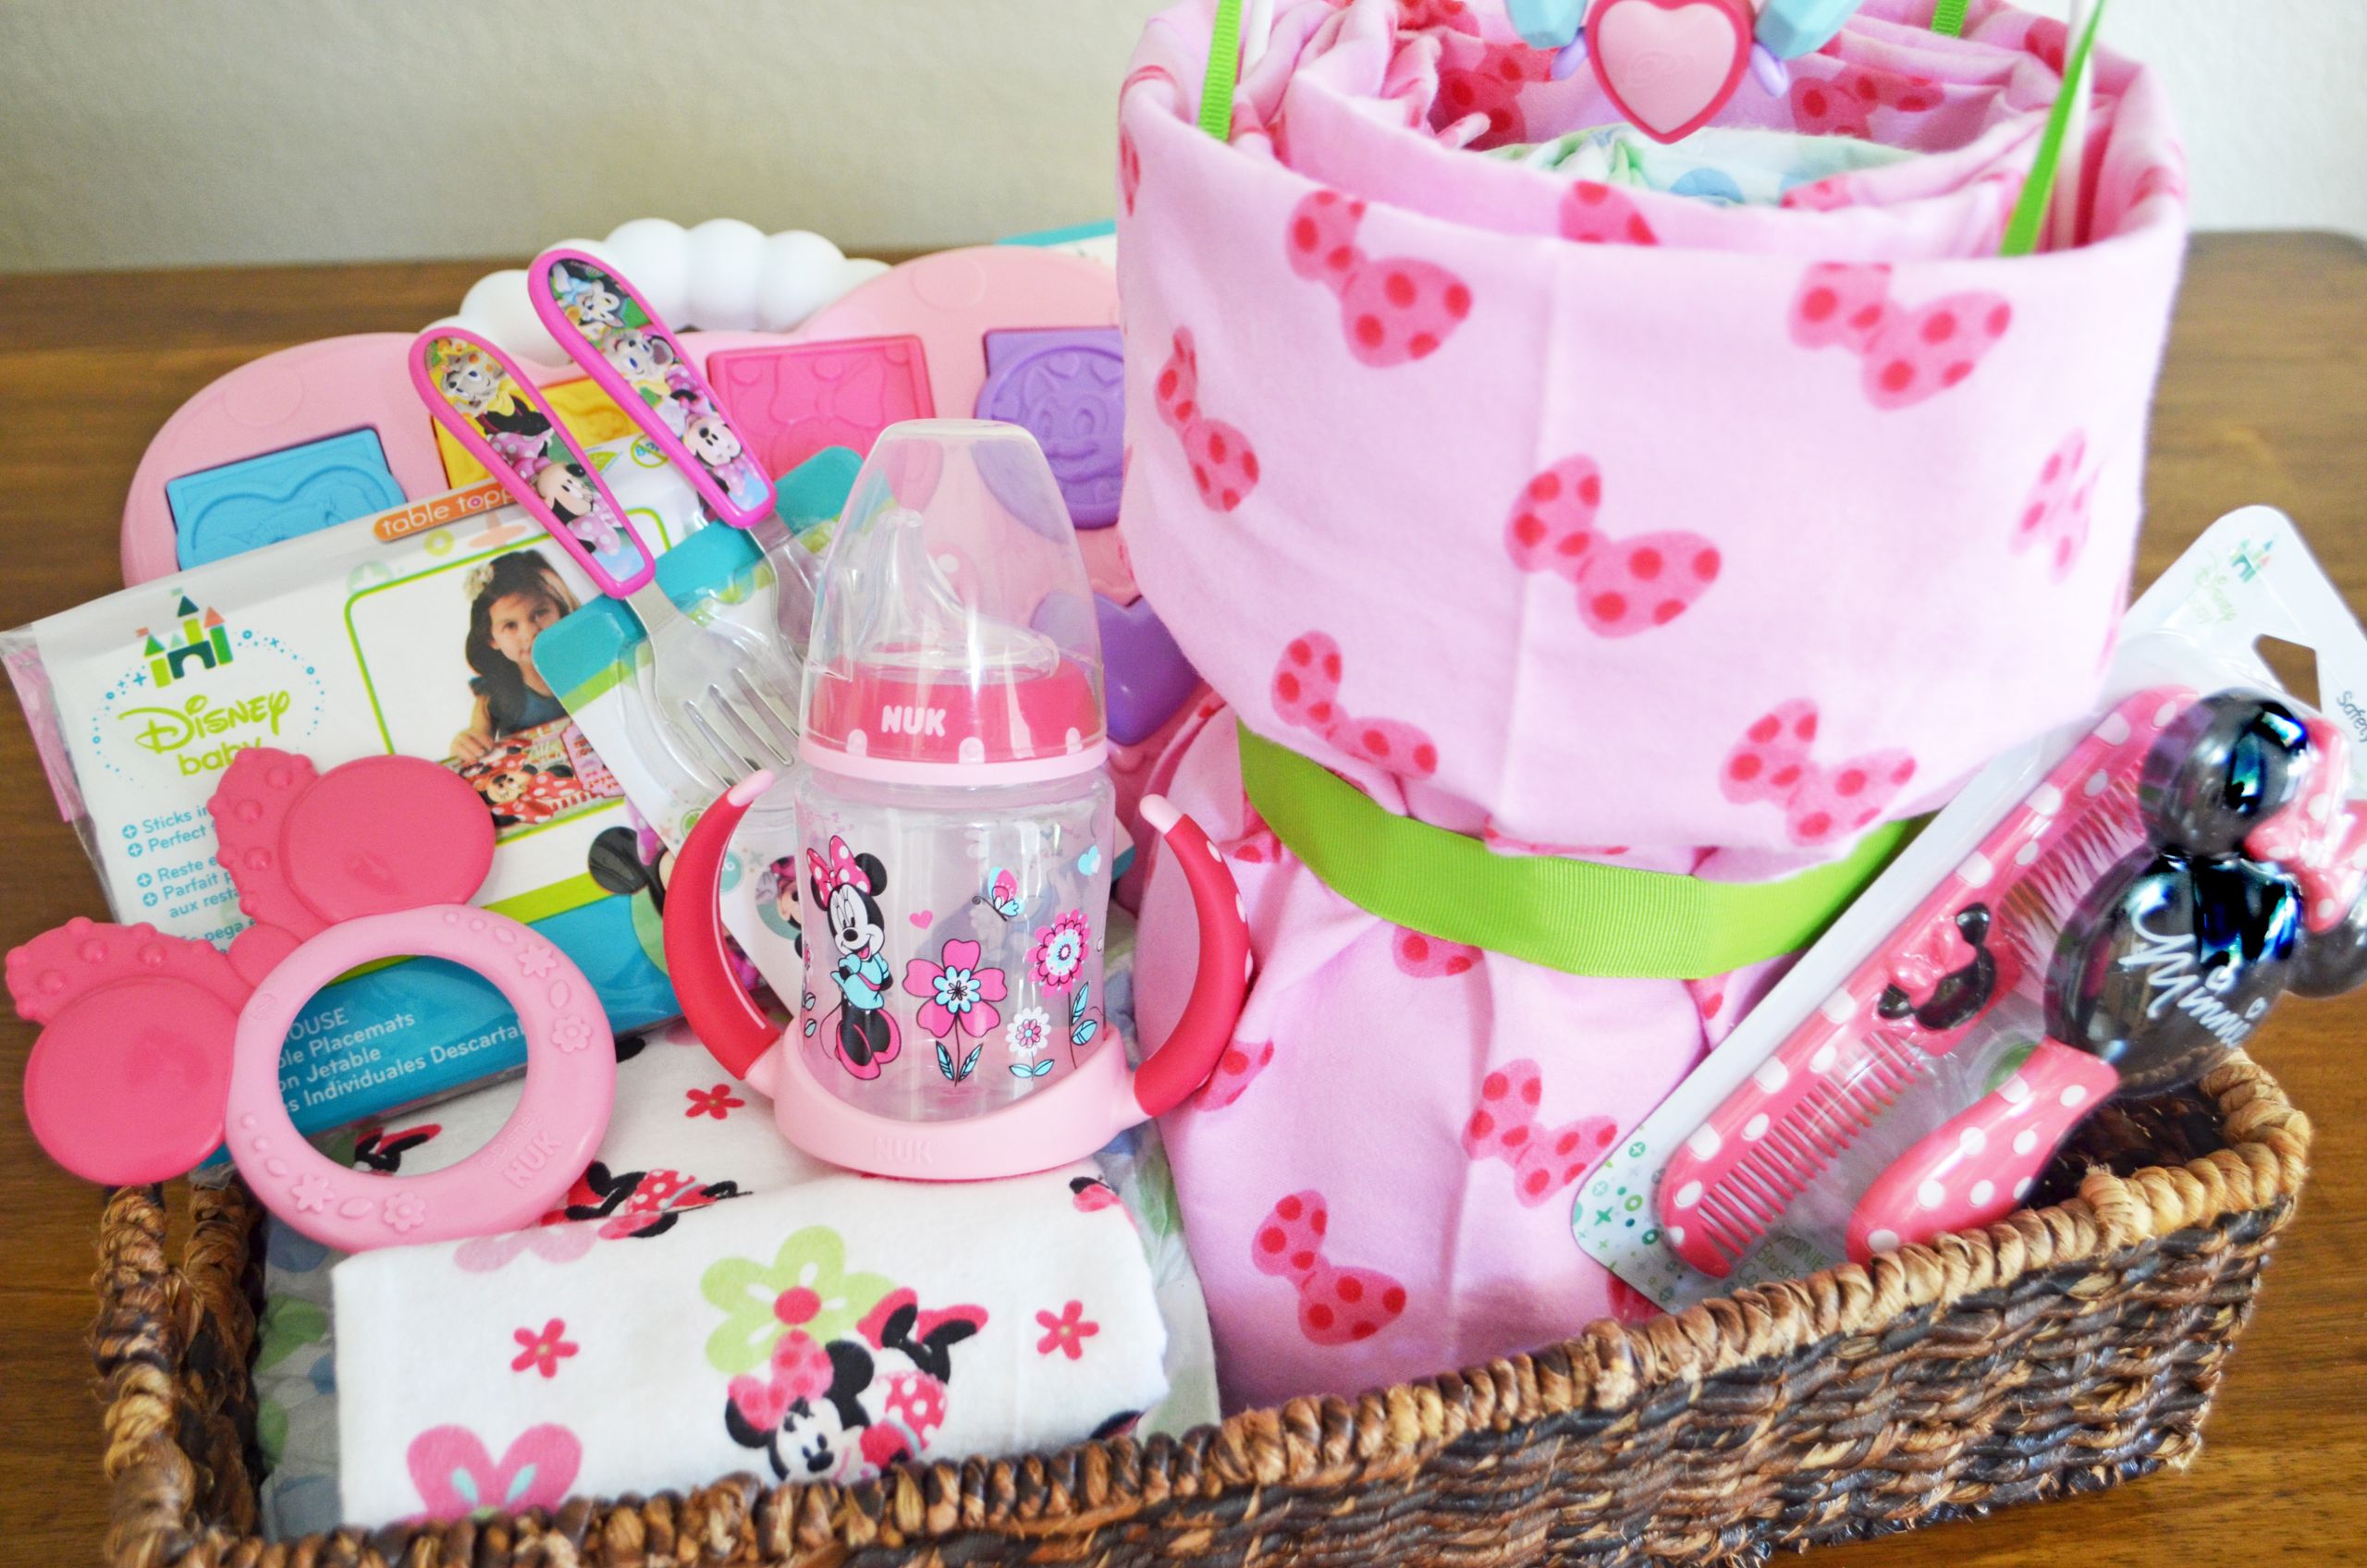 Disney Gift Ideas For Girlfriend
 Princess Diaper Cake Creating the Perfect Disney Baby